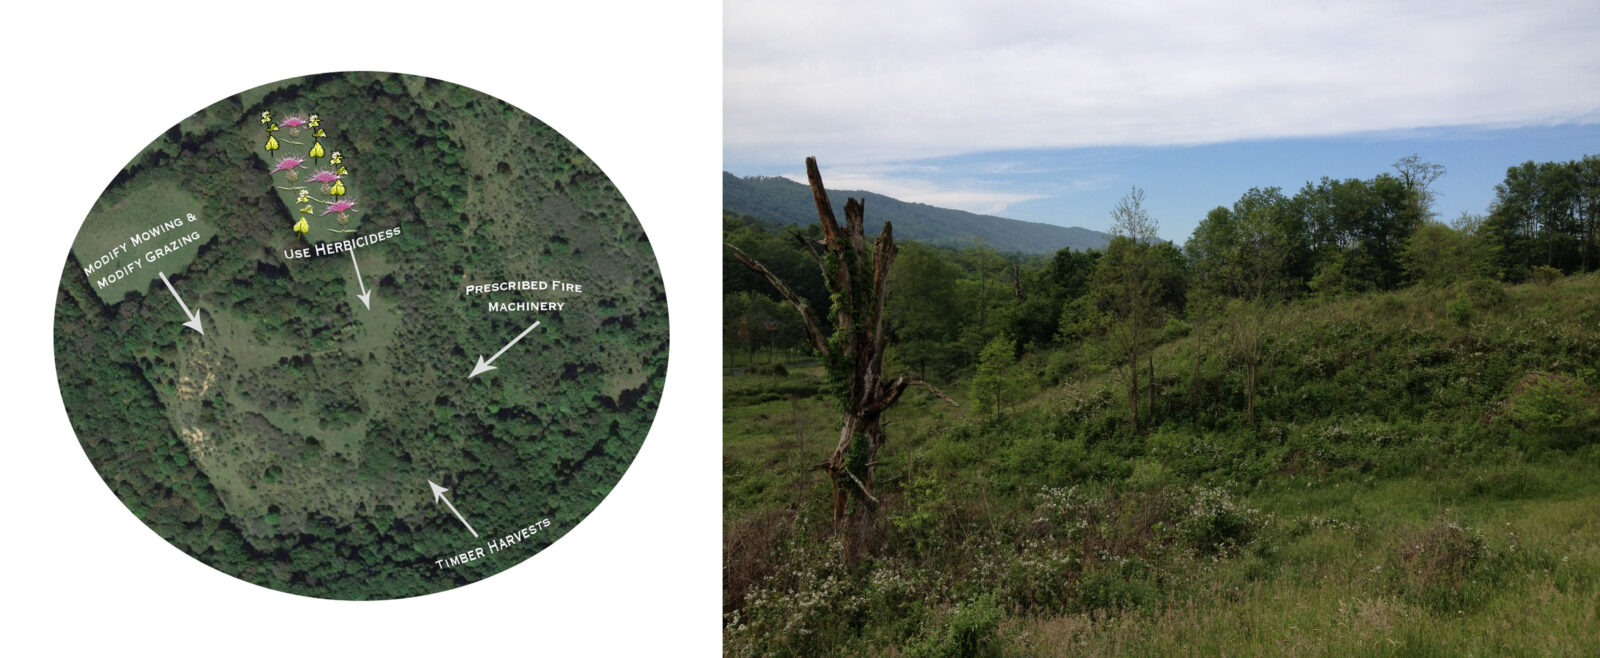 Left: There are a variety of ways to create and maintain high quality shrubland habitat, like that in the center of this aerial photograph. These include timber harvests, decreasing mowing and grazing intensity, using herbicides to control invasive species, and prescribed fire and machinery to thin shrubs when they become too overgrown. Right: This shrubland habitat is the result of reduced grazing intensity, though grazing was still actively occurring at the site. Notice the mix of forest, shrubs, saplings, and wildflowers - this is habitat for Golden-winged Warblers and many other types of wildlife.